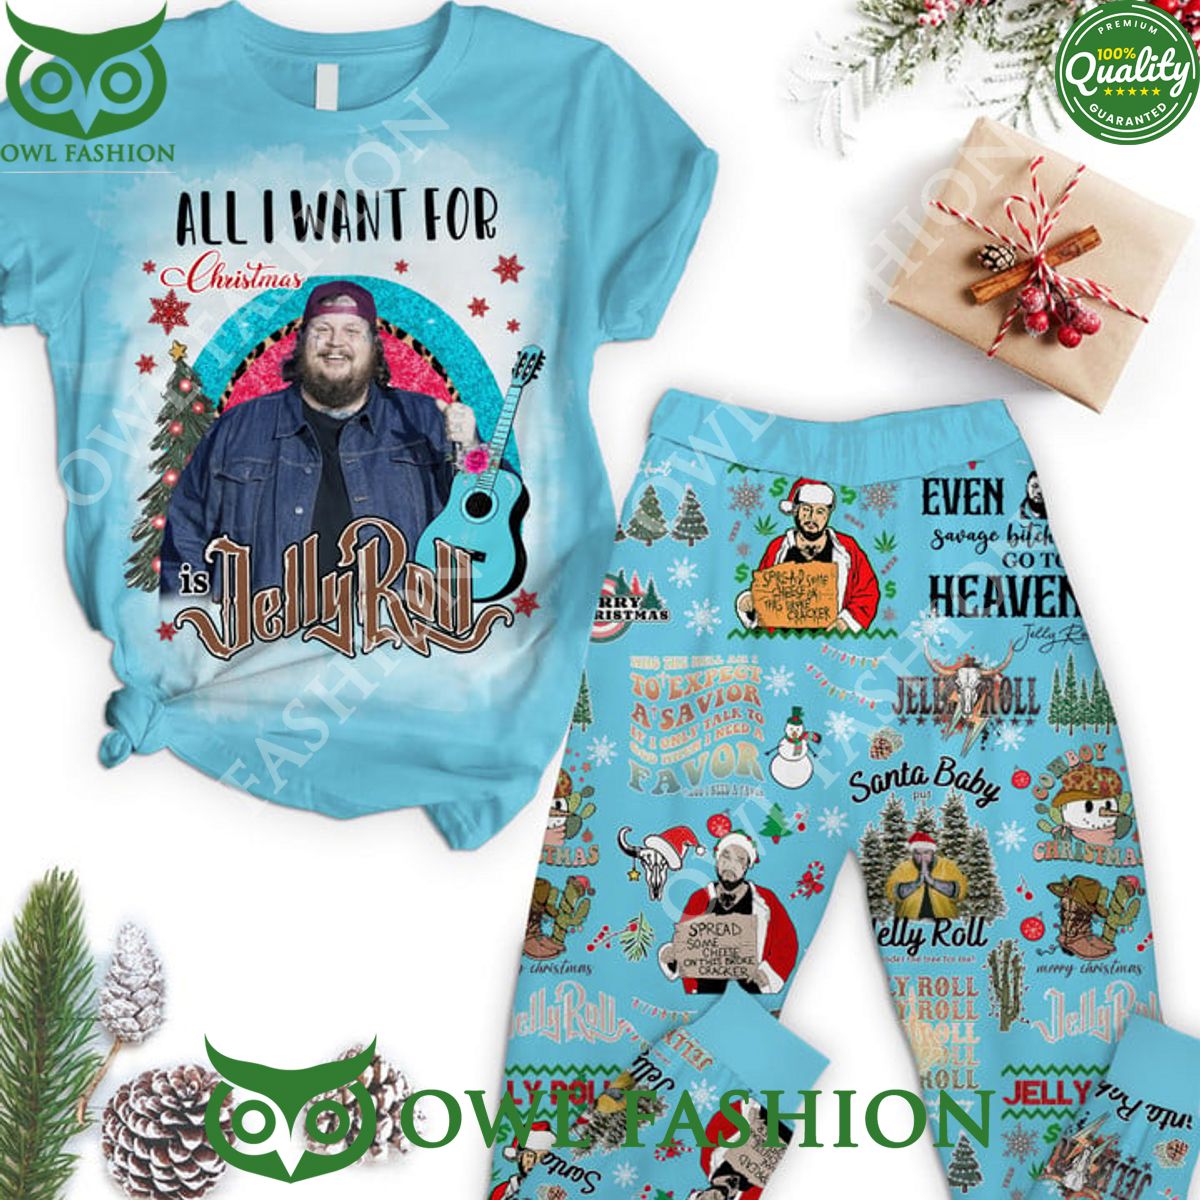 Jelly Roll rapper Christmas Pajamas Set All I want for